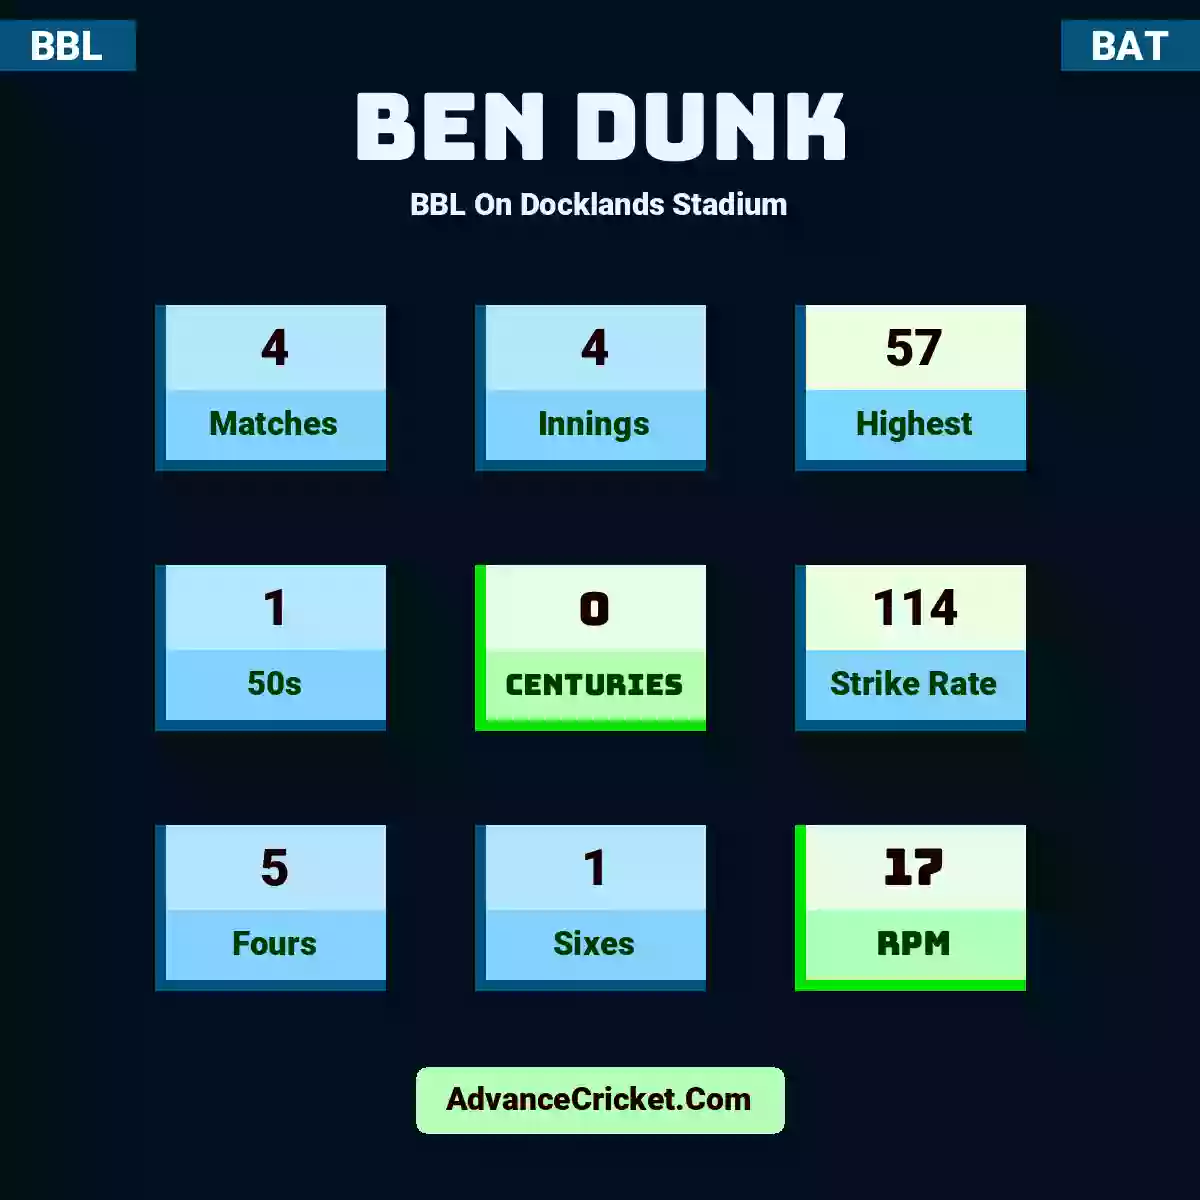 Ben Dunk BBL  On Docklands Stadium, Ben Dunk played 4 matches, scored 57 runs as highest, 1 half-centuries, and 0 centuries, with a strike rate of 114. B.Dunk hit 5 fours and 1 sixes, with an RPM of 17.